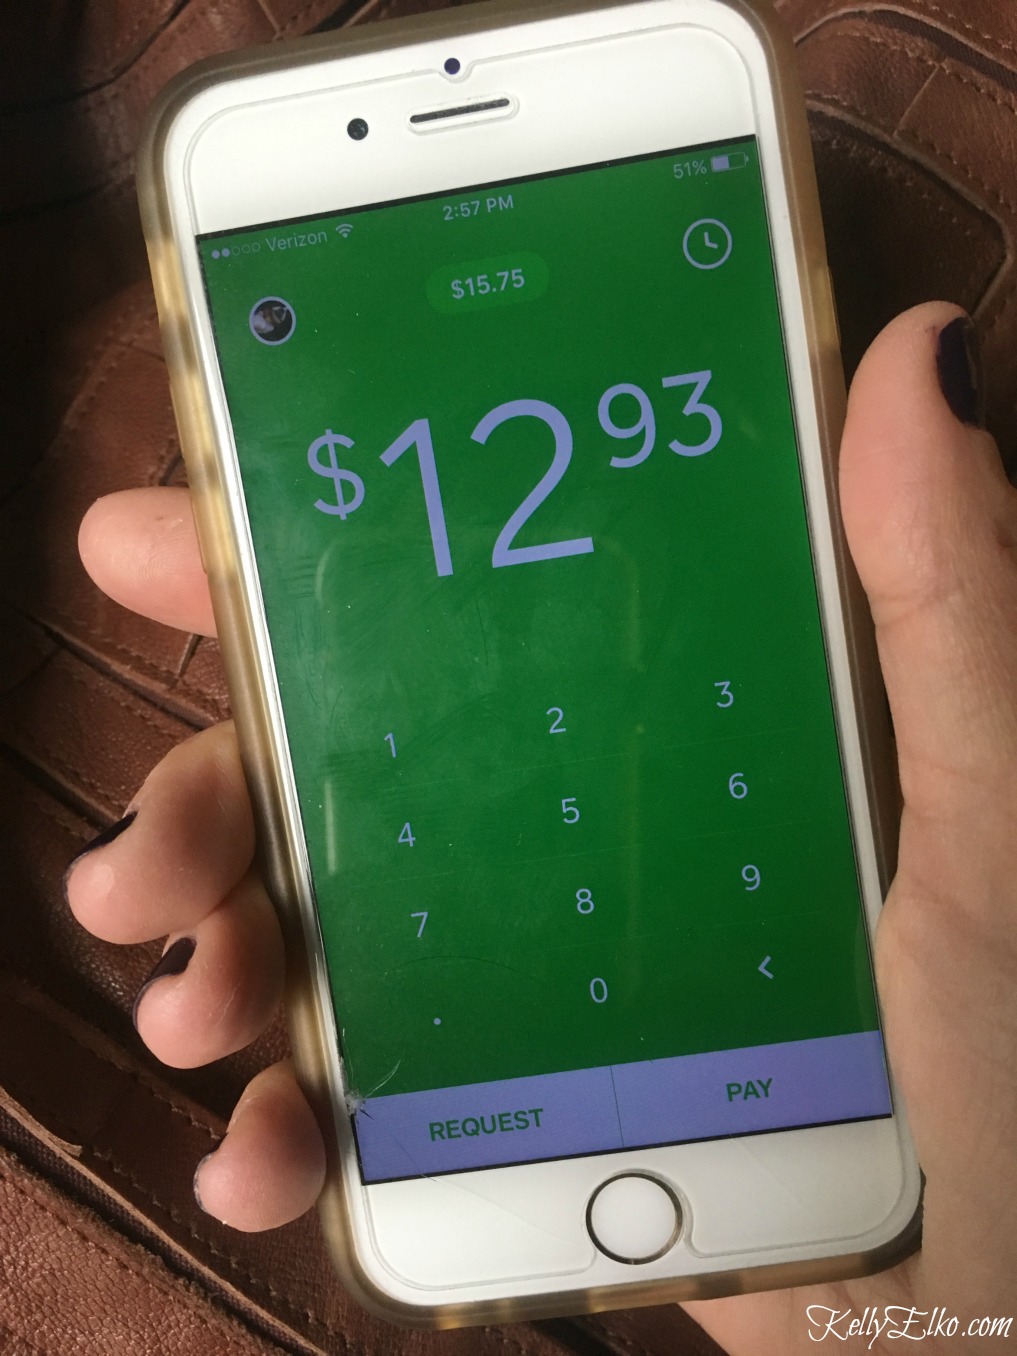 Square Cash - the easy way to pay or get paid when you don't have cash! kellyelko.com